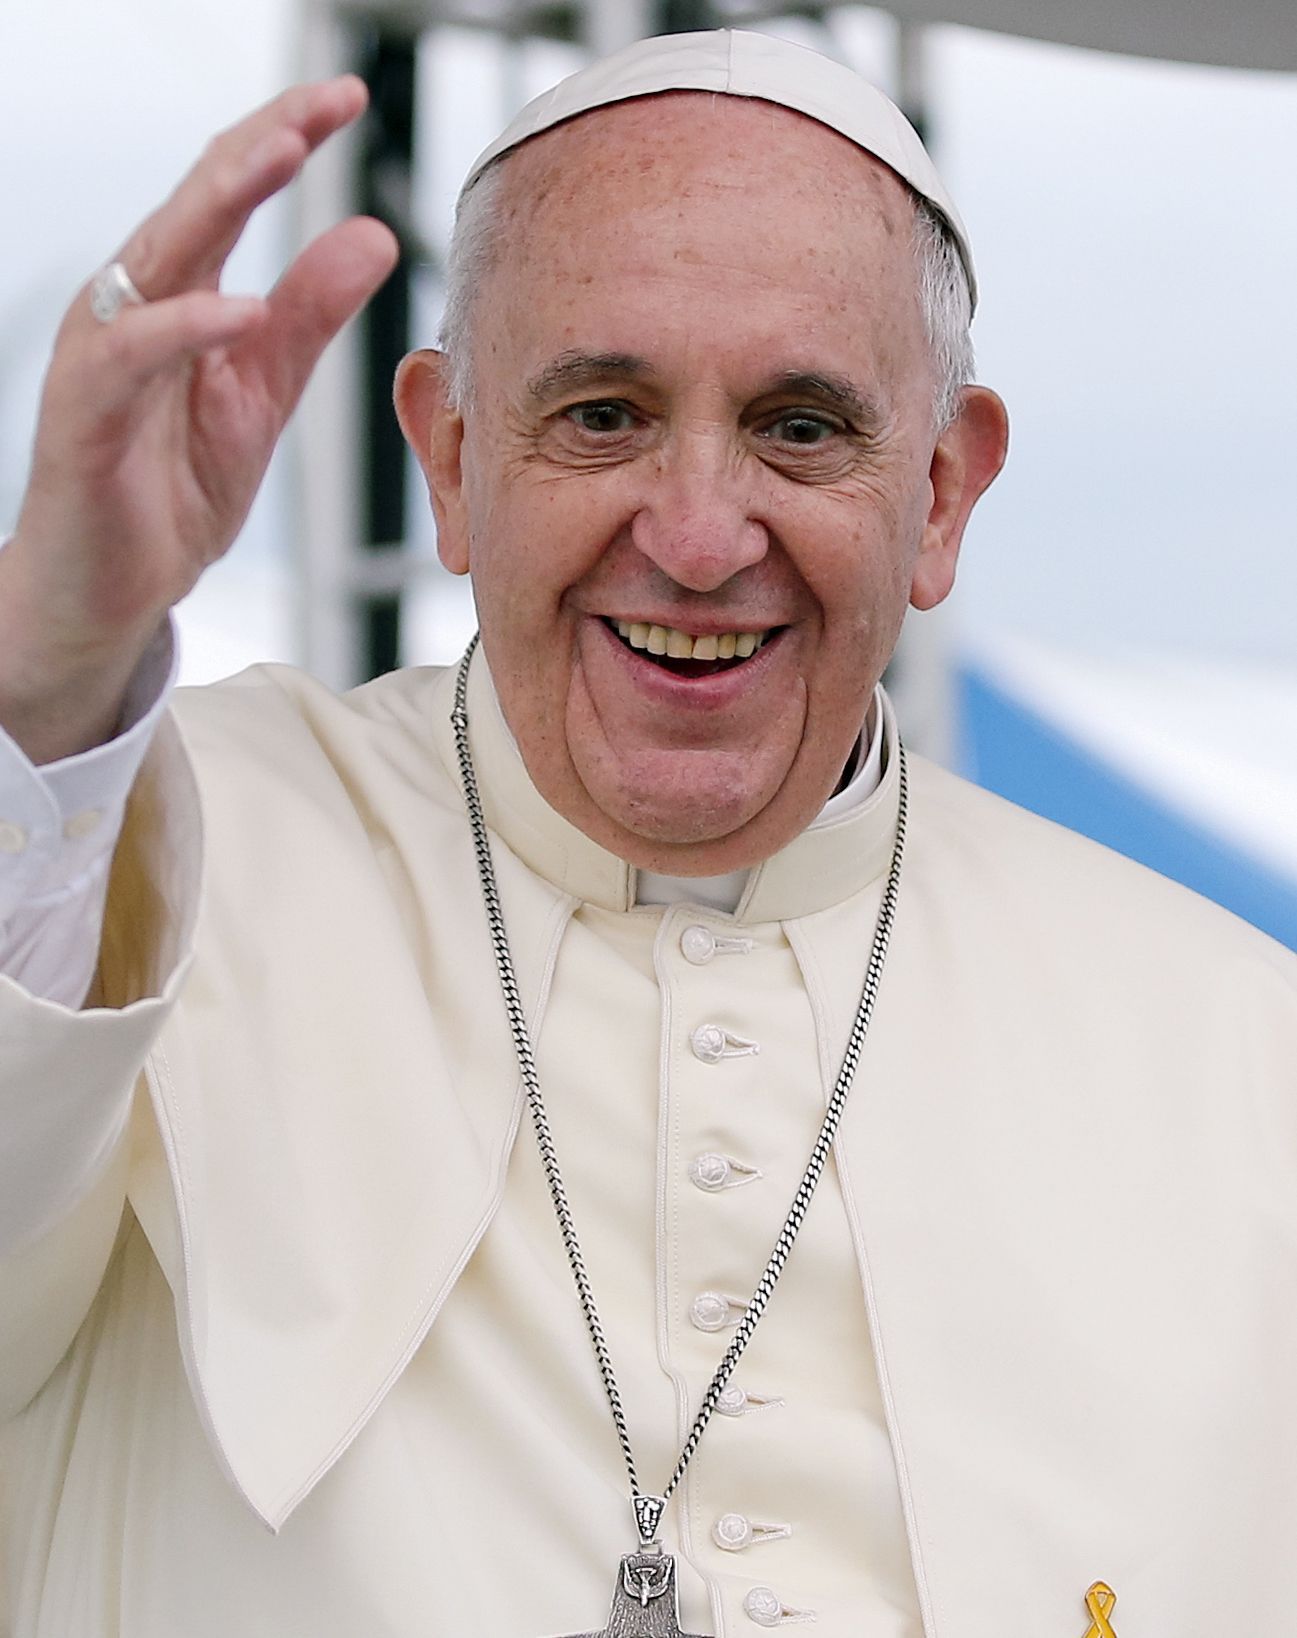 Greening Justice: Can Disparate Actors Heed Pope Francis’s Call for Unity?